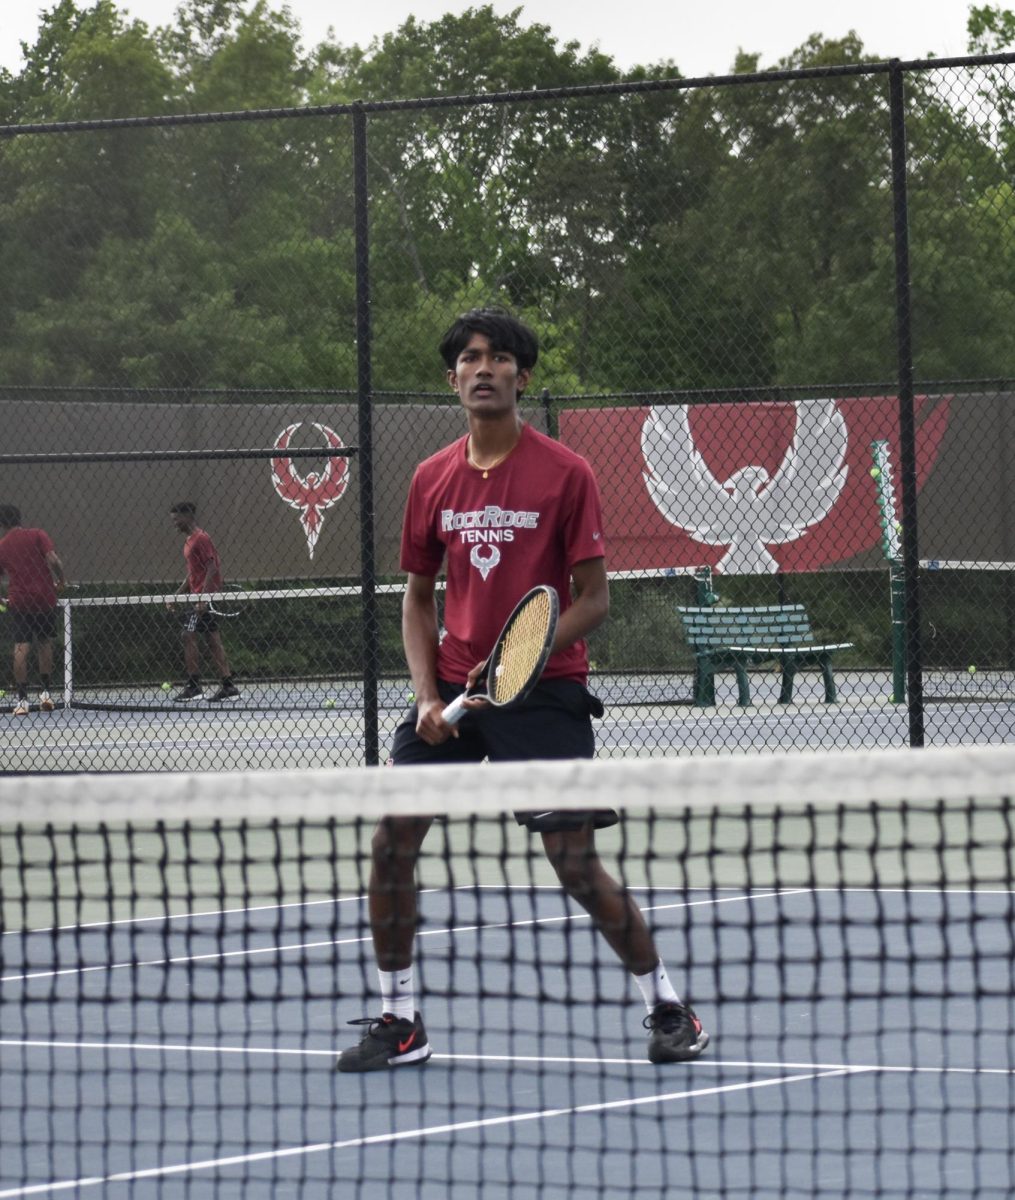 Senior Kaushik Muskari:
“This might be my favorite season out of all four years because we’ve been winning a lot and I’ve been spending a lot of time with the team and on the court. When we don’t have a match, we usually have morning practice, and it’s a really good time for team bonding and working on everything that we need to on the court. My favorite part of the season has been when I won region doubles with my partner so now we’re progressing to states. I’m planning to continue tennis at George Mason University and major in computer engineering, so I’ve got a long road ahead of me.” 